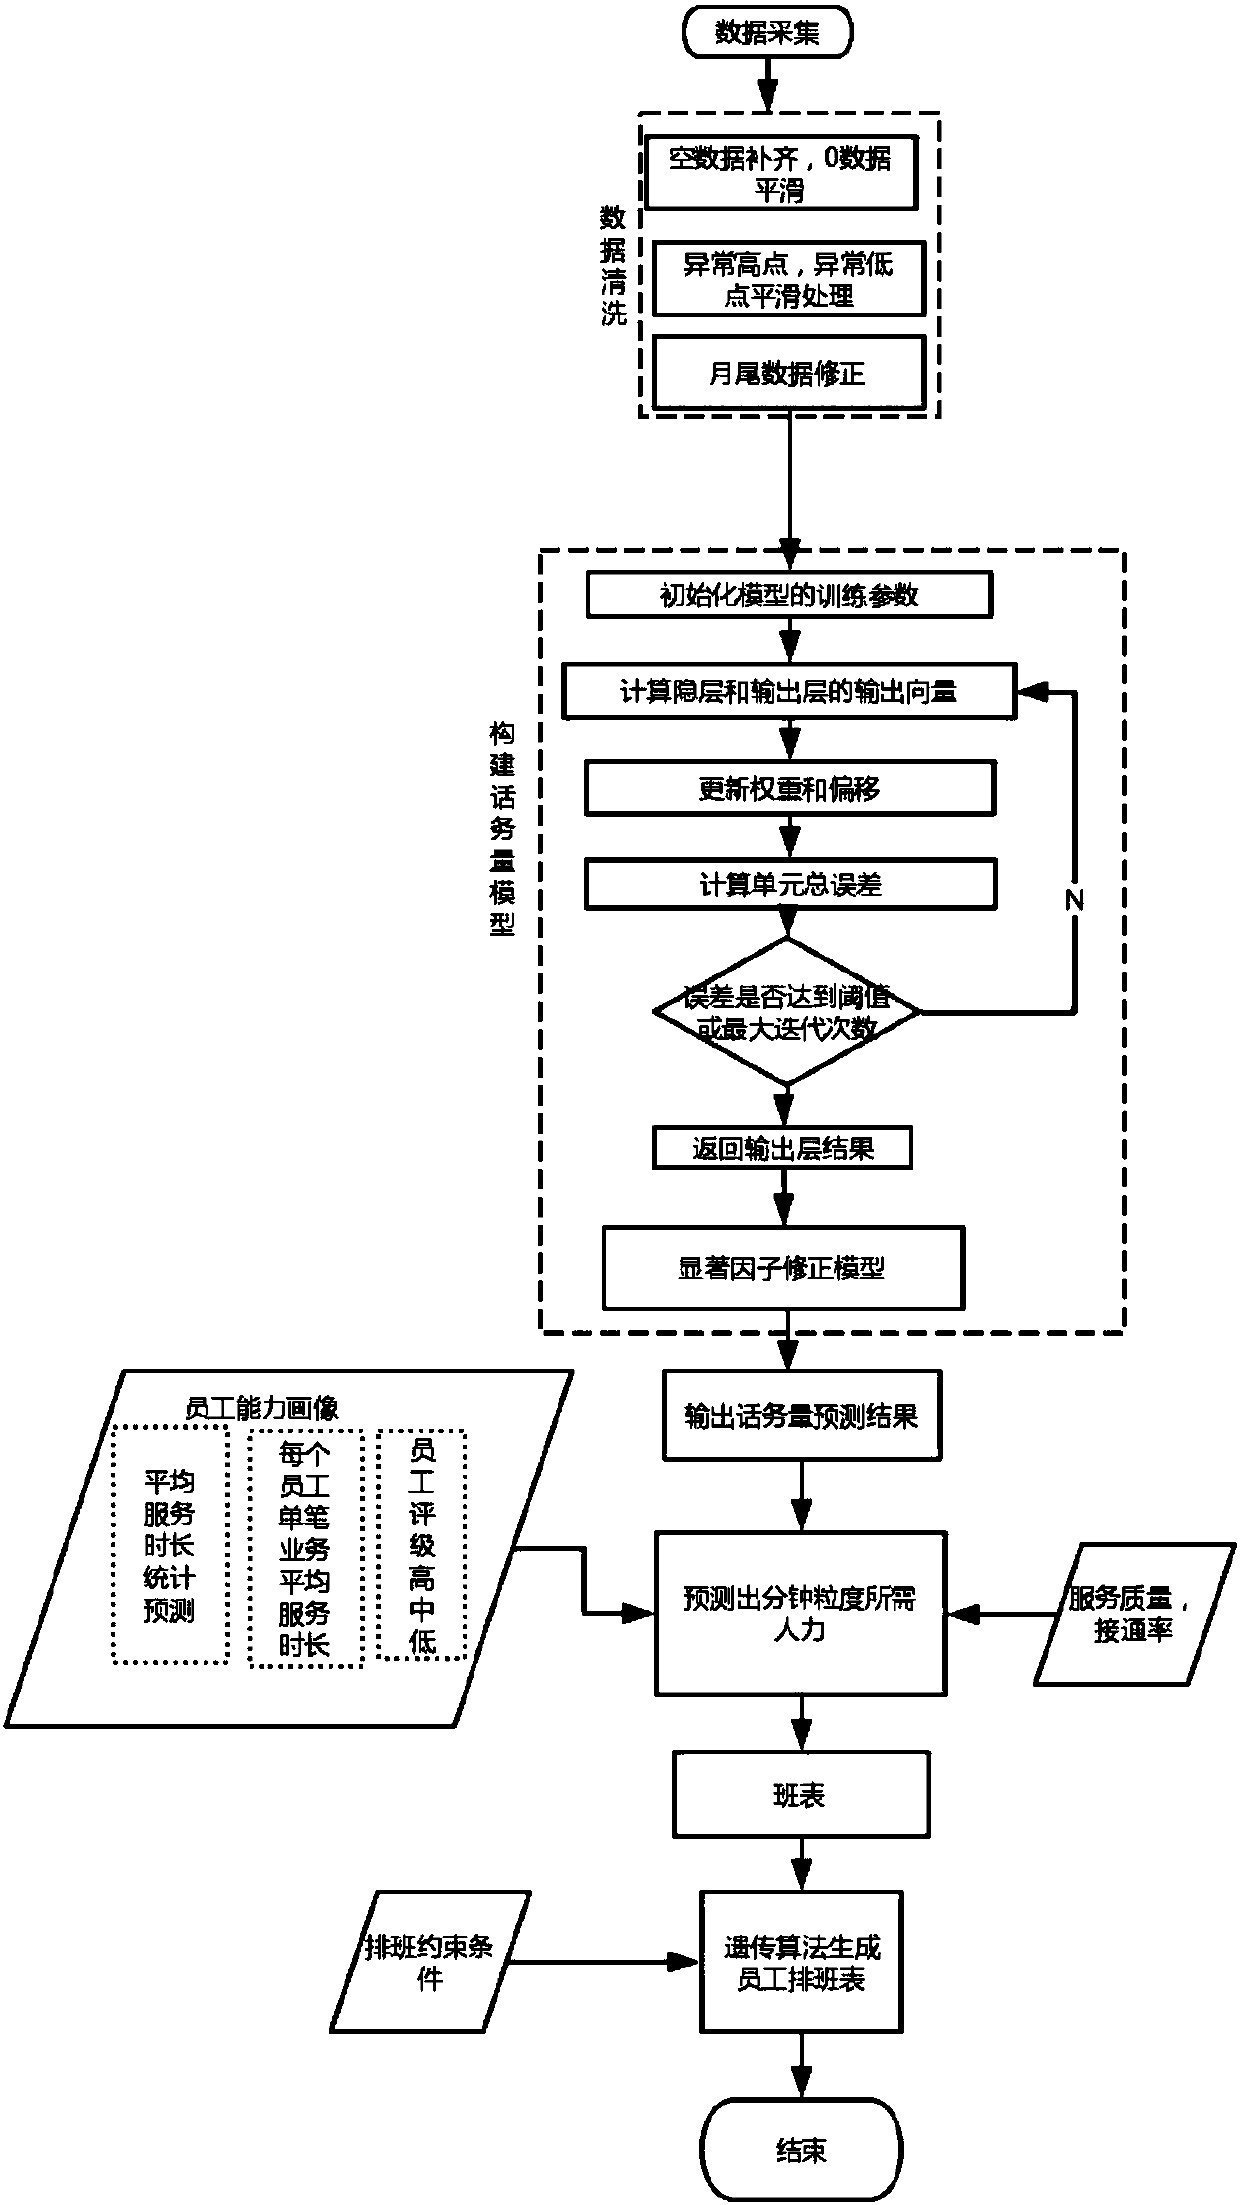 Automatic scheduling method for call center based on telephone traffic prediction